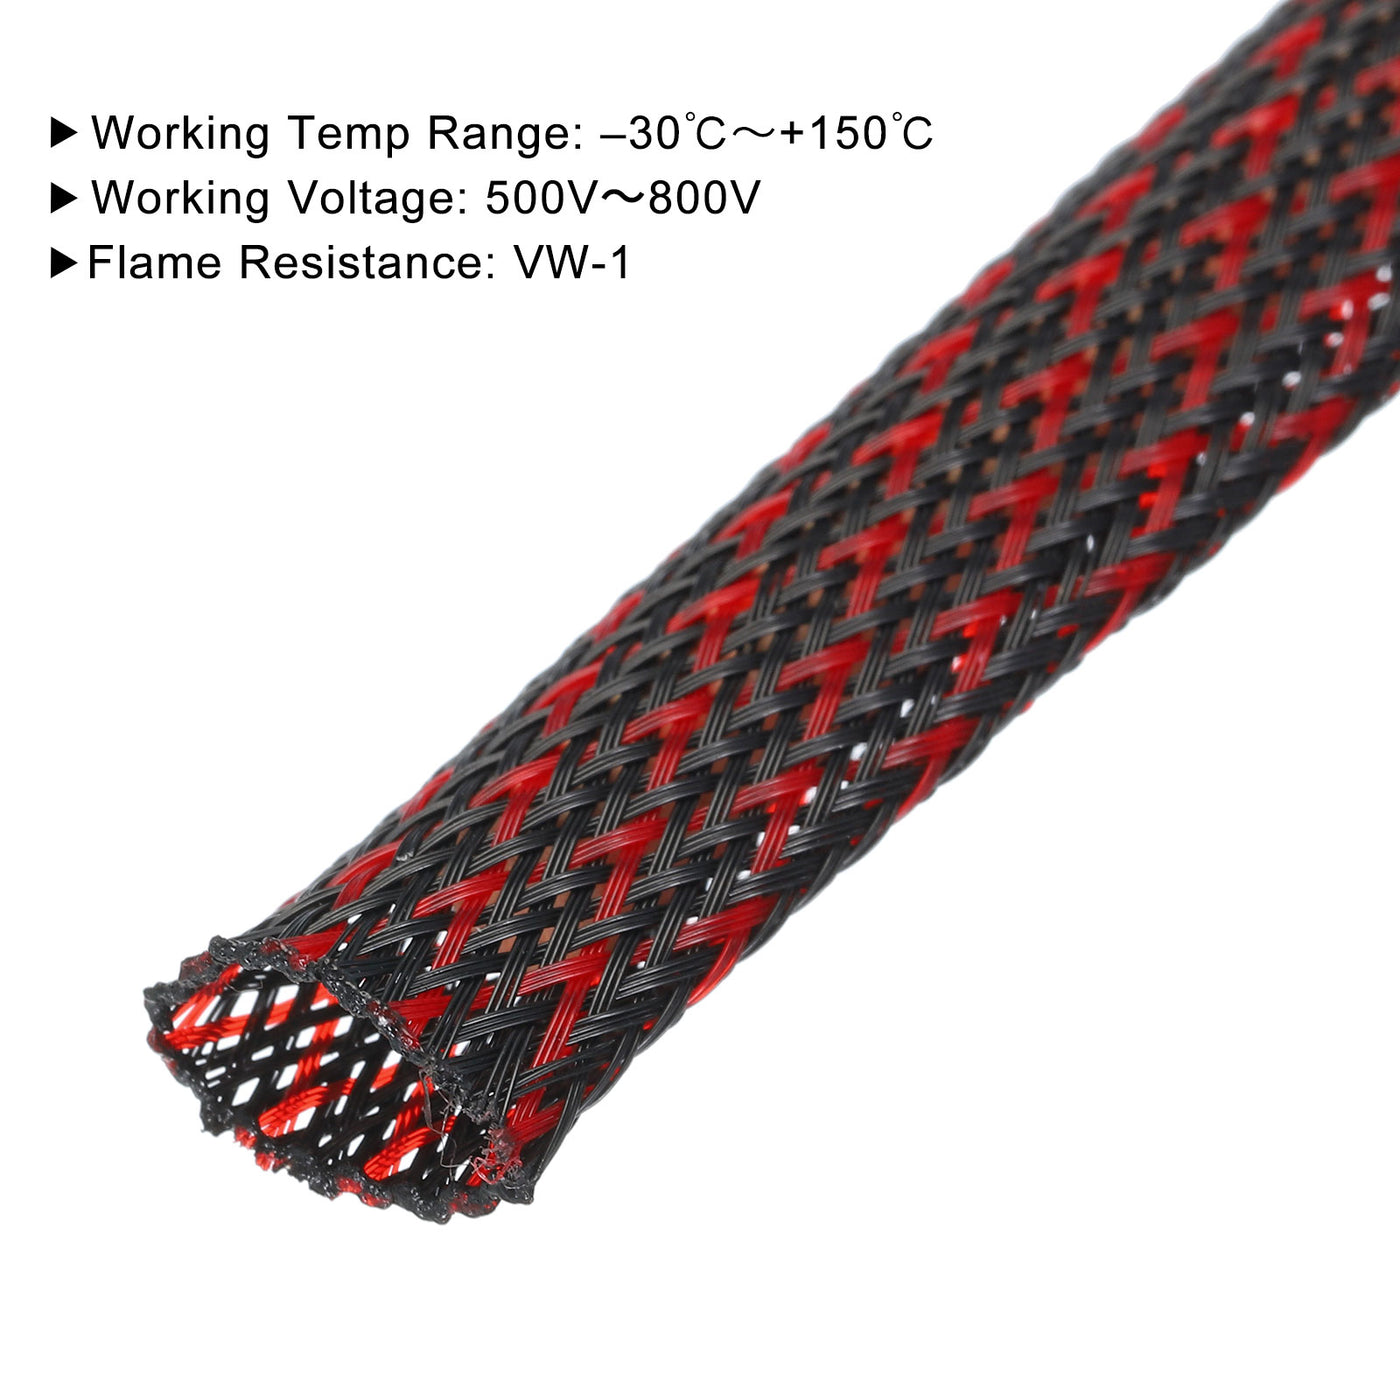 uxcell Uxcell Insulation Braid Sleeving, 9.84 Ft-19mm High Temperature Sleeve Black Red